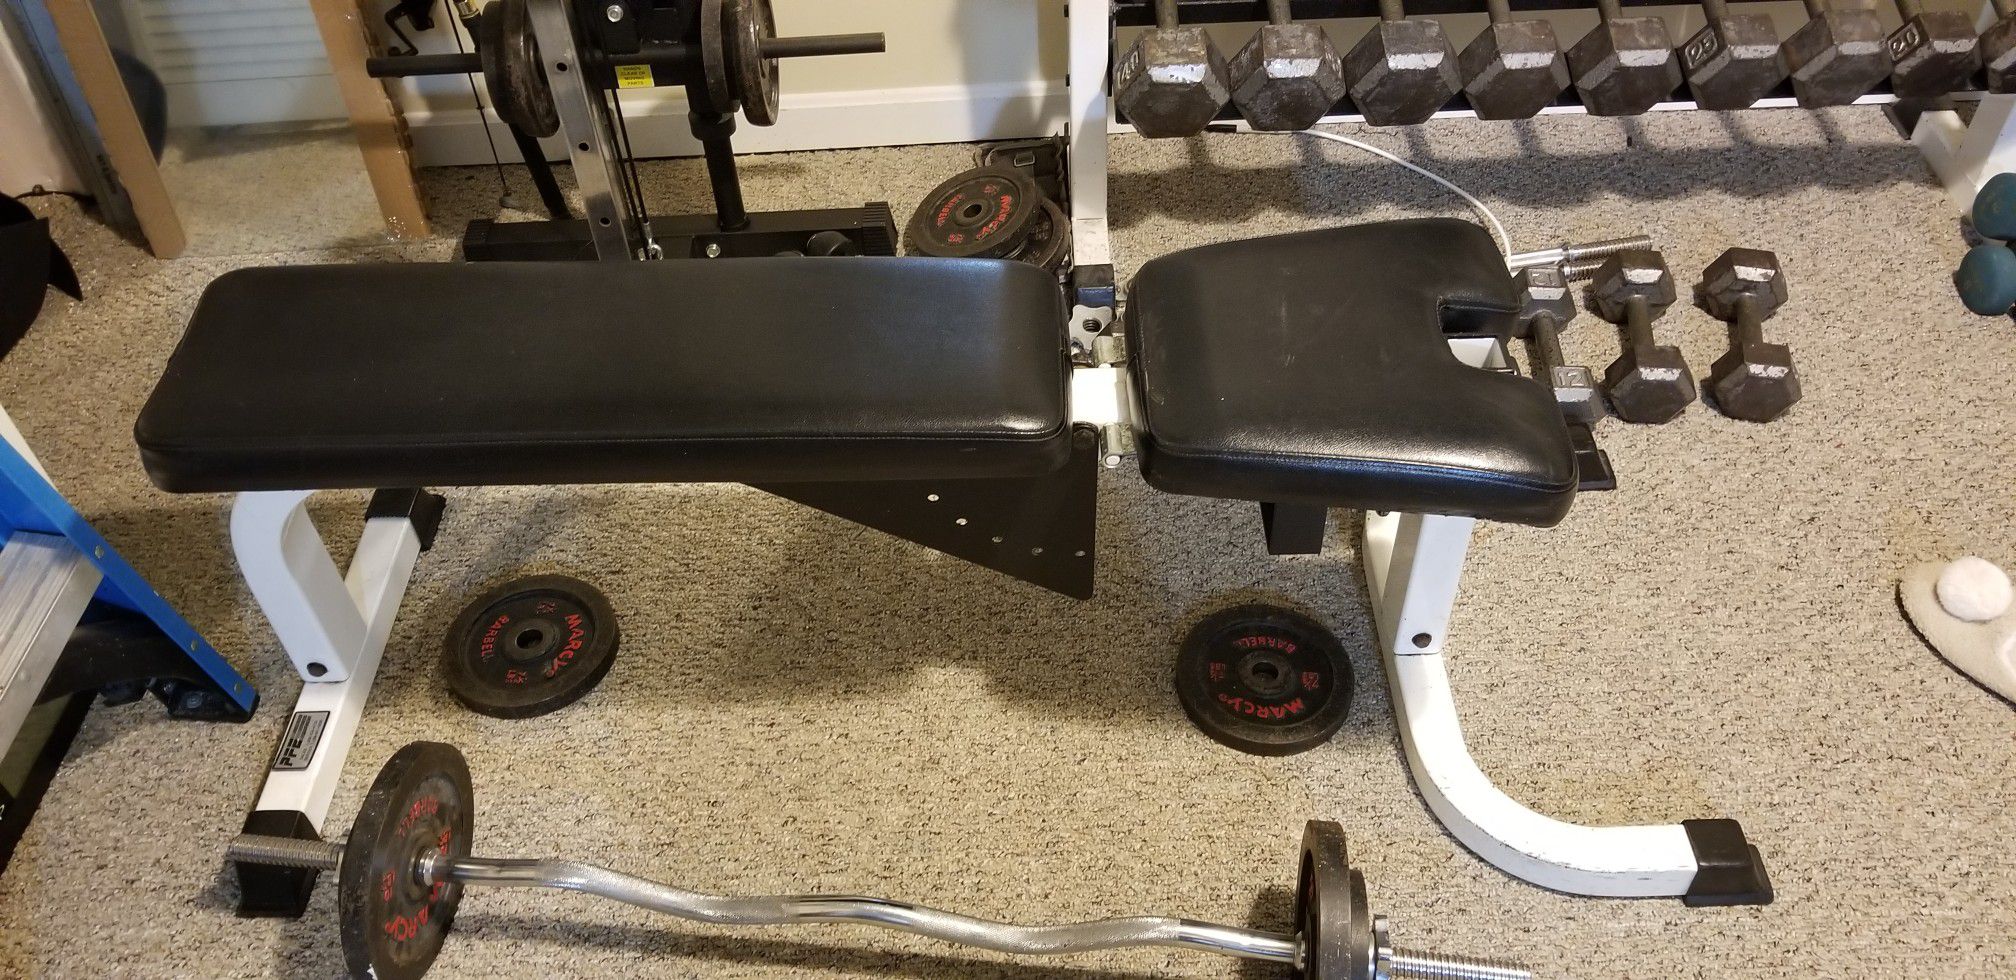 PFE Weight bench (commercial grade)